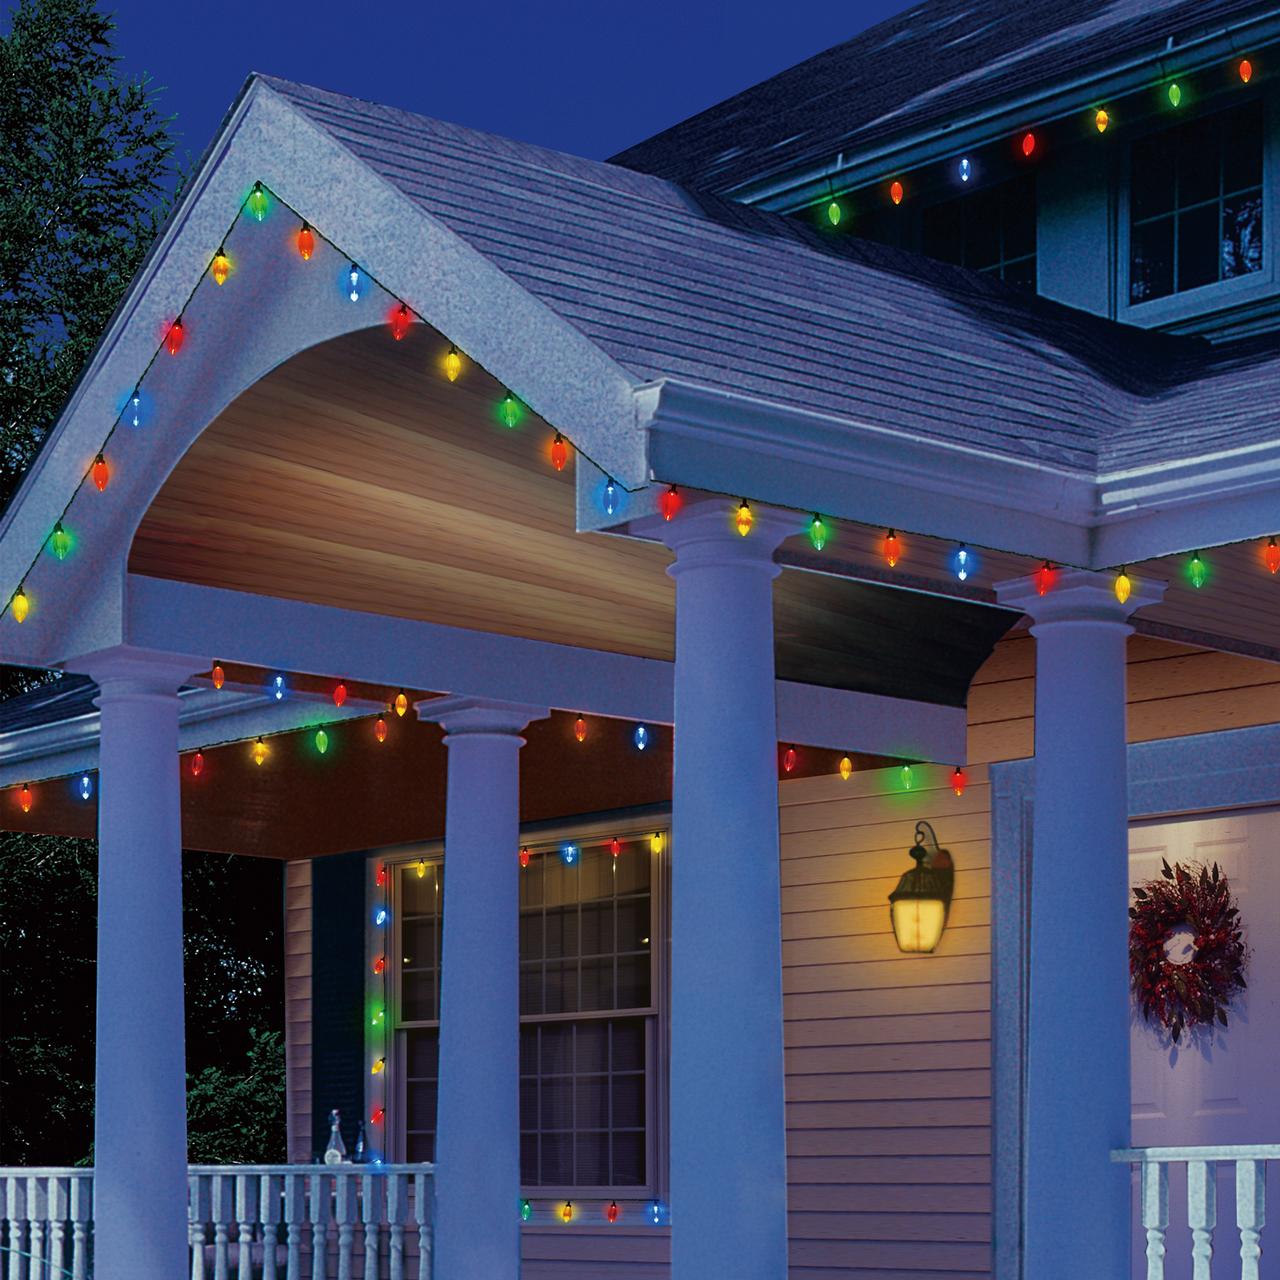 15' Holiday Time Ultra Bright LED C9 Bulb Christmas Lights (Multicolor) $3.48 + Free S&H w/ Walmart+ or $35+